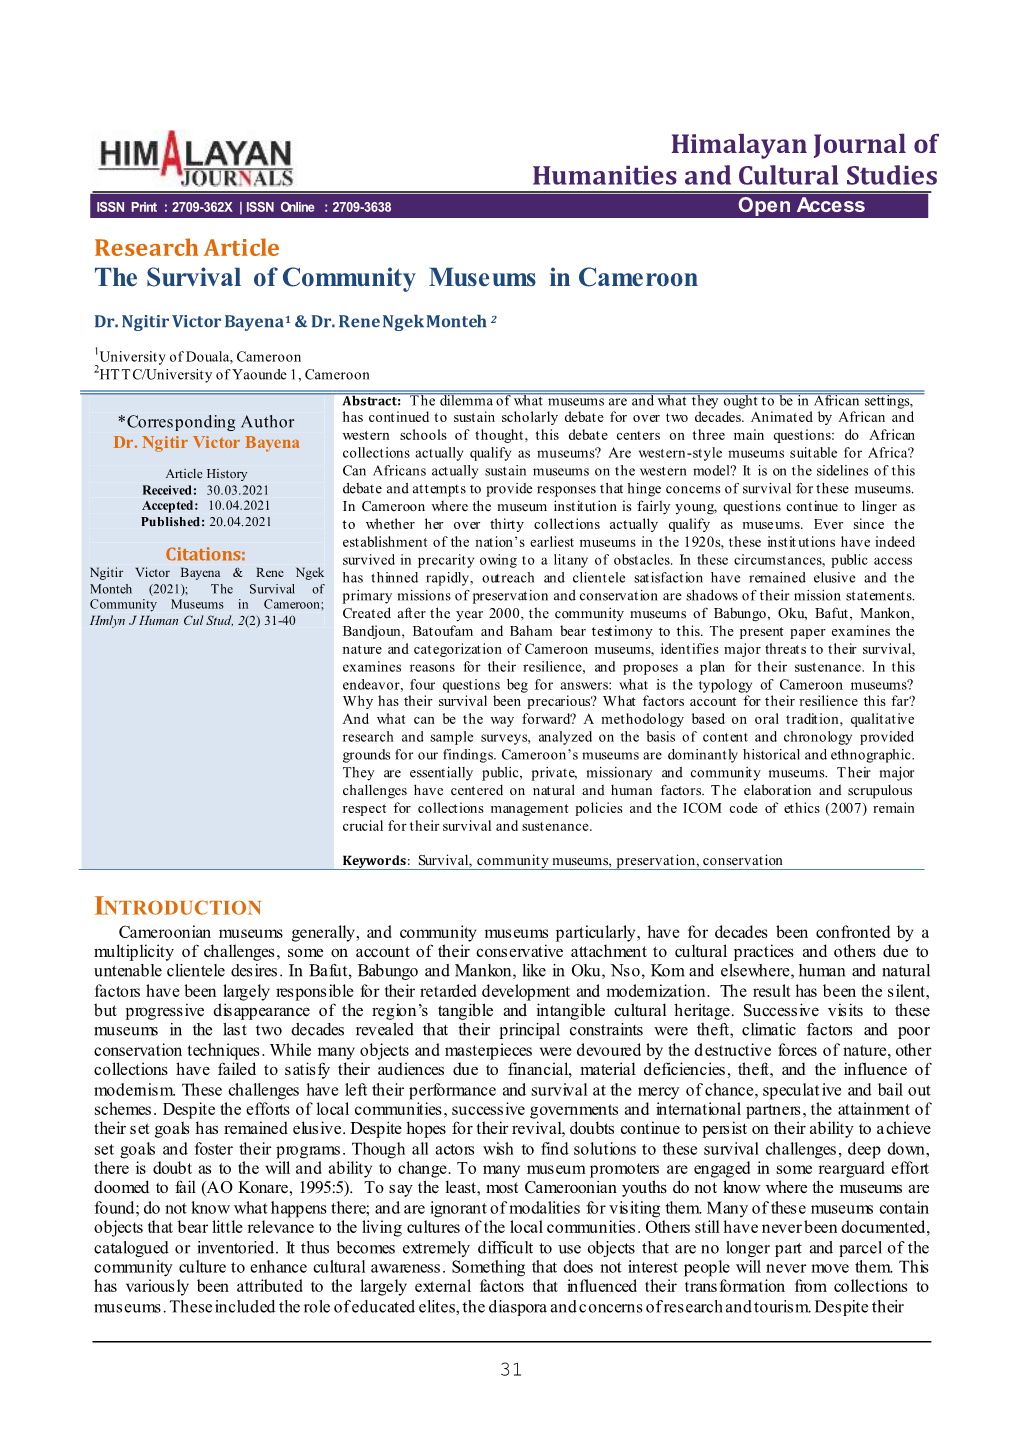 Himalayan Journal of Humanities and Cultural Studies the Survival of Community Museums in Cameroon